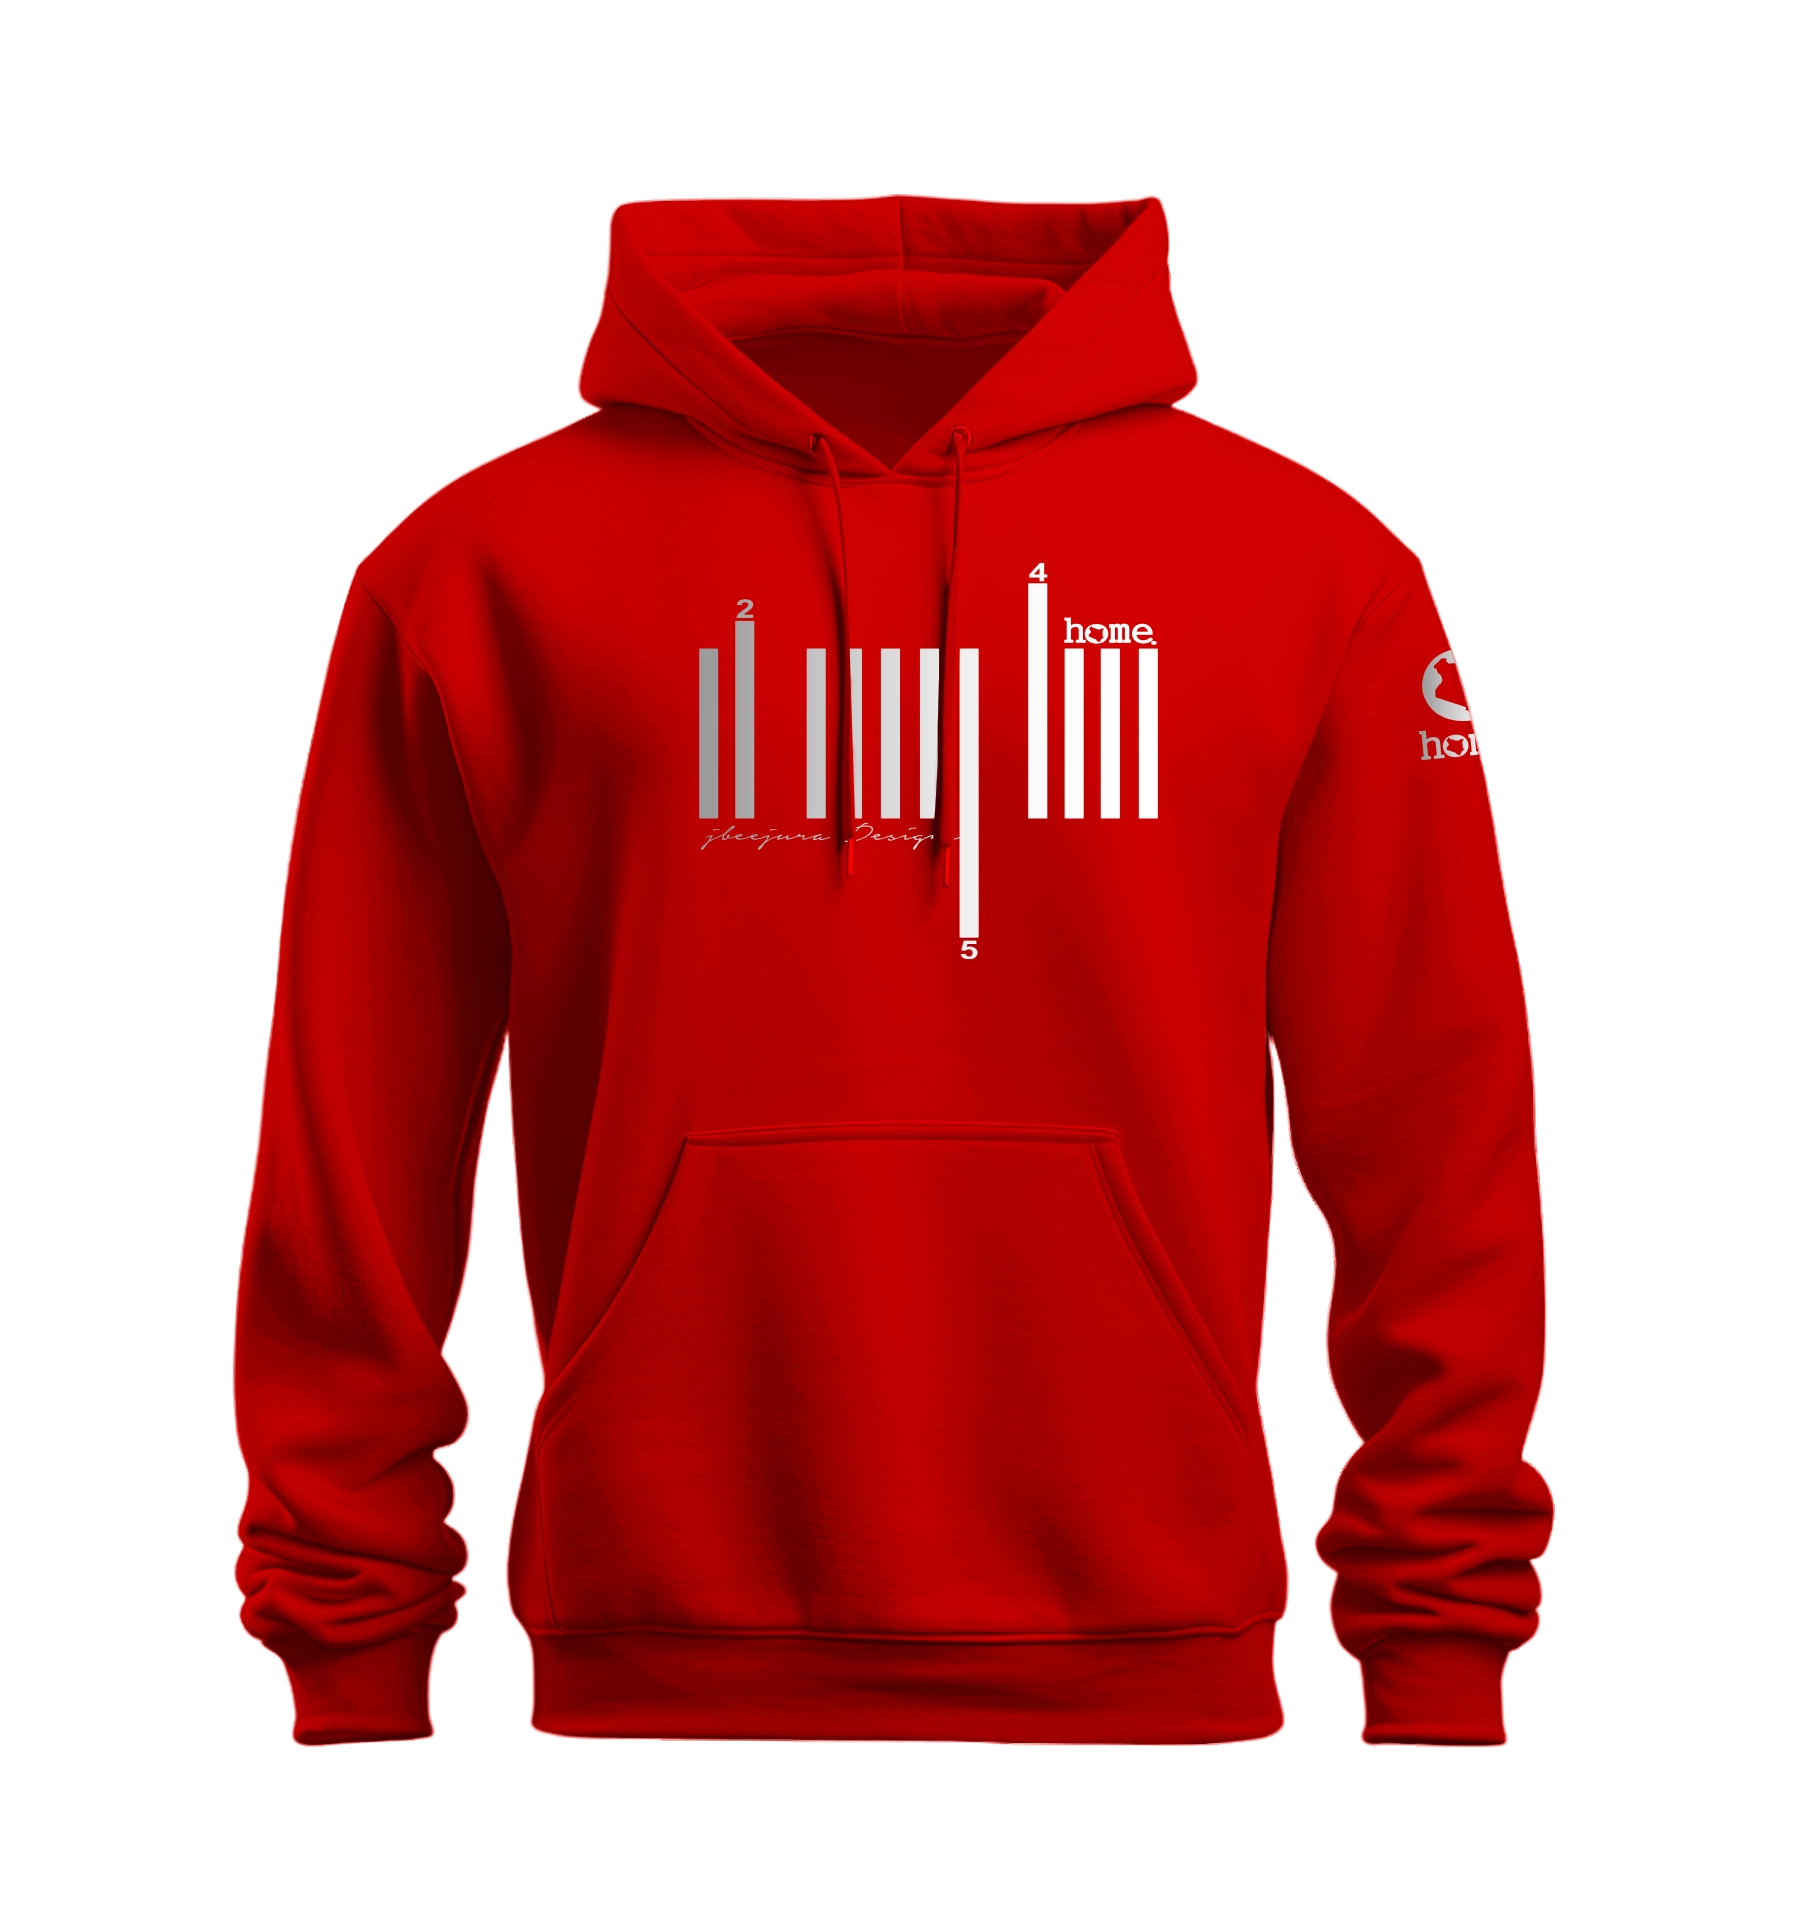 home_254 NUVETRA™ RED HOODIE WITH A SILVER BARS PRINT